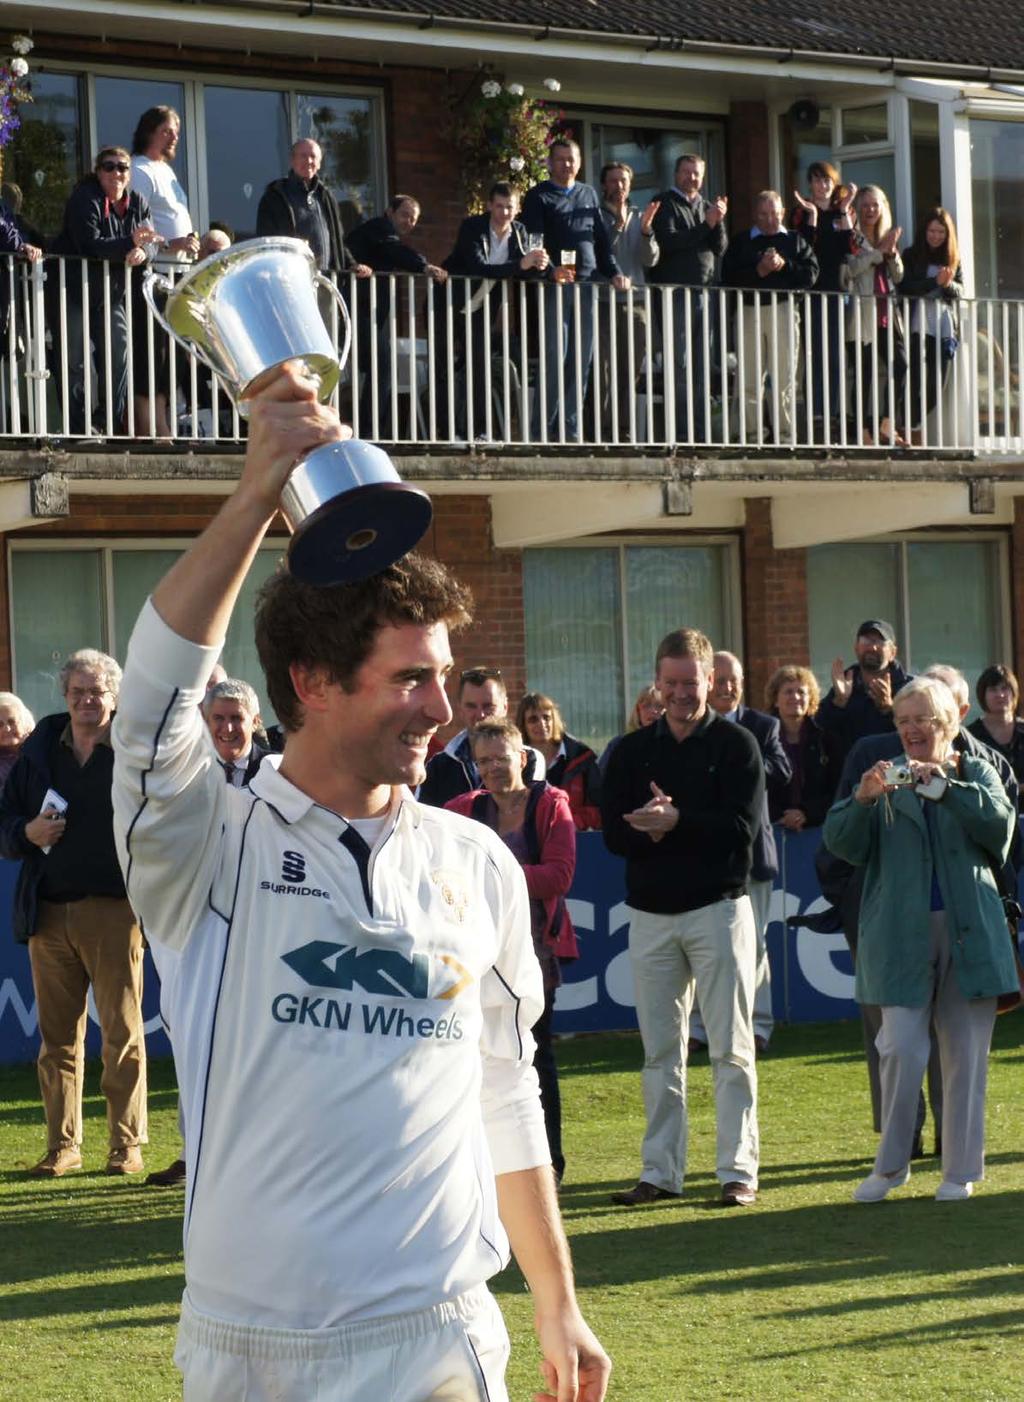 Allied to this is the recent individual achievements of some of our players with no fewer than five earning full-time contracts with first-class county sides, ten being selected for Worcestershire s